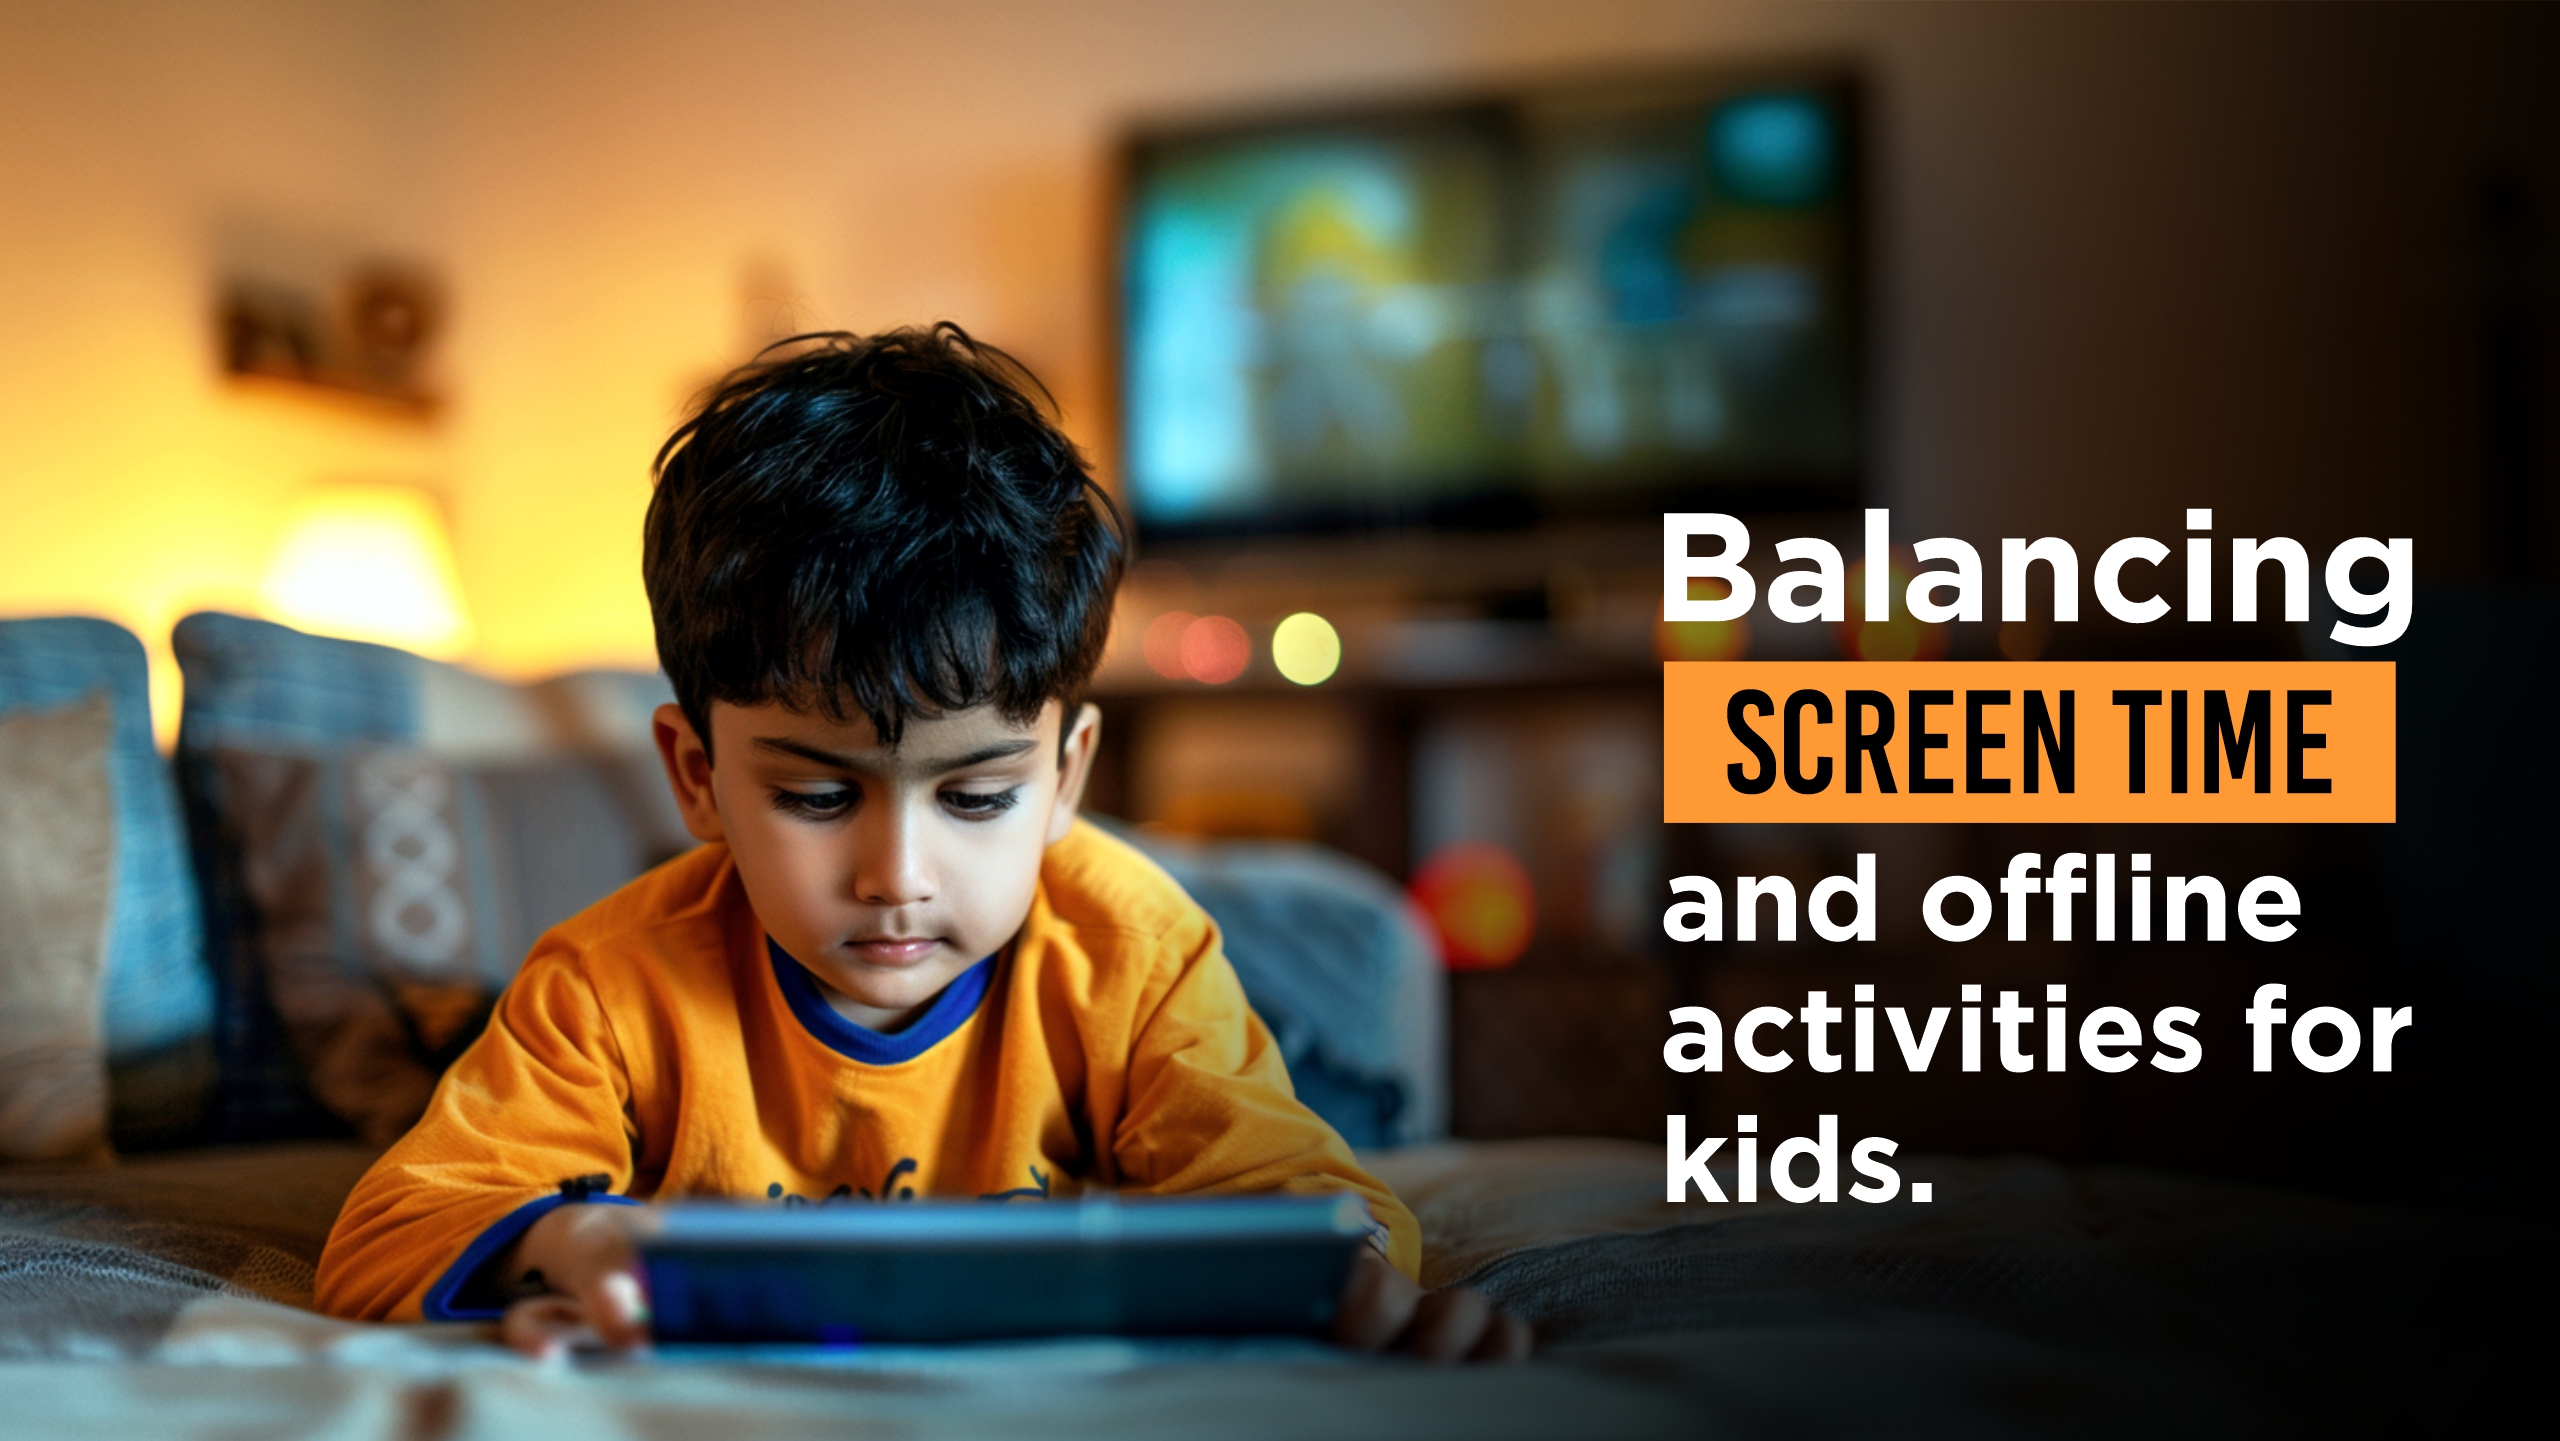 Balancing Screen Time and offline activities for kids